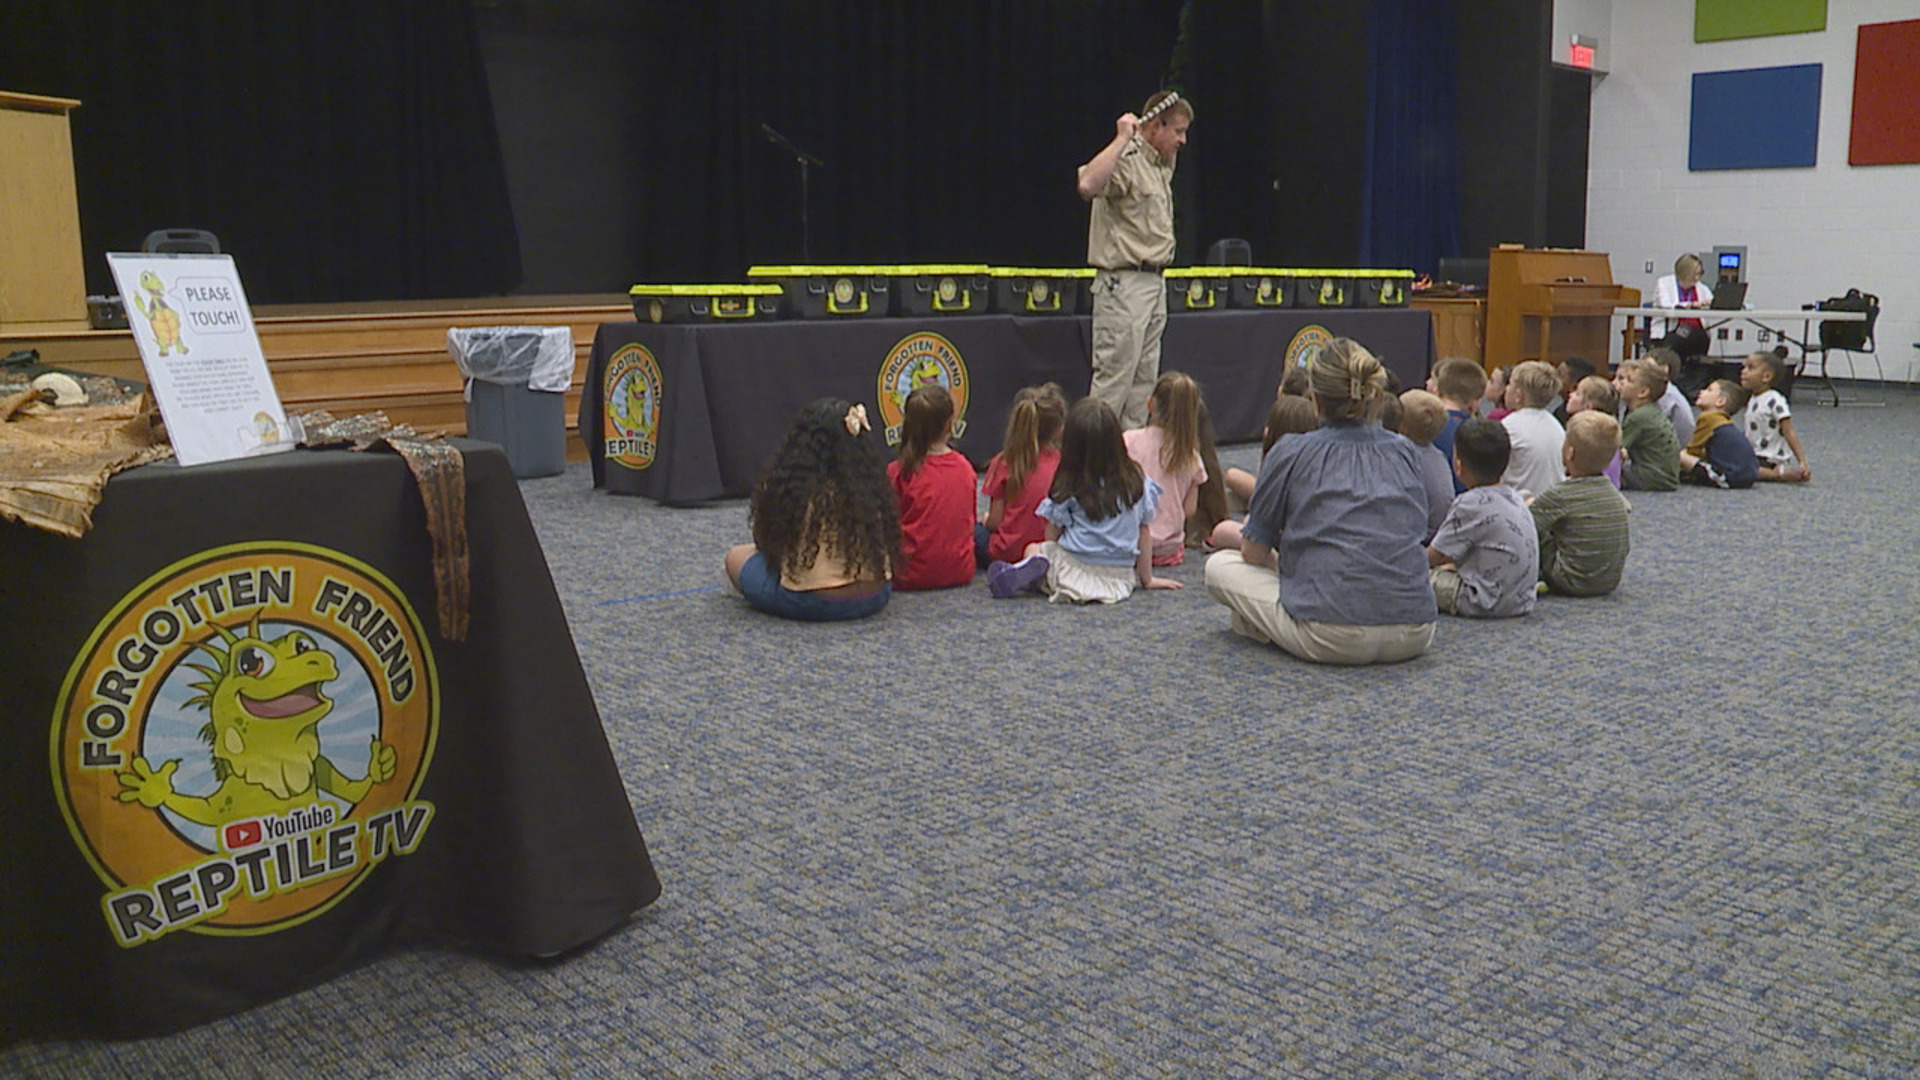 Students in Lebanon County got a surprise visit from a few reptile friends on Tuesday, including snakes, turtles and a cayman.